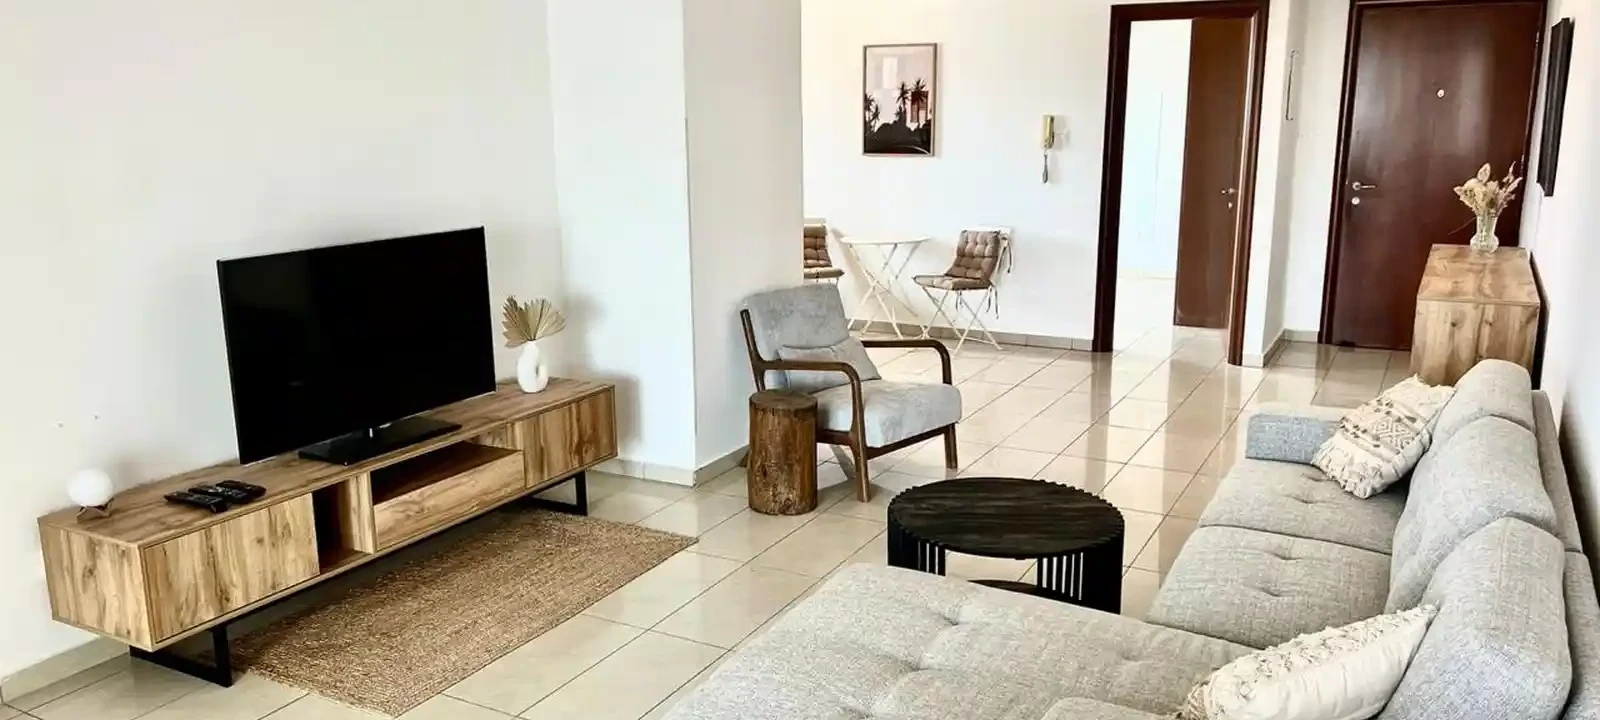 3-bedroom apartment to rent €1.450, image 1